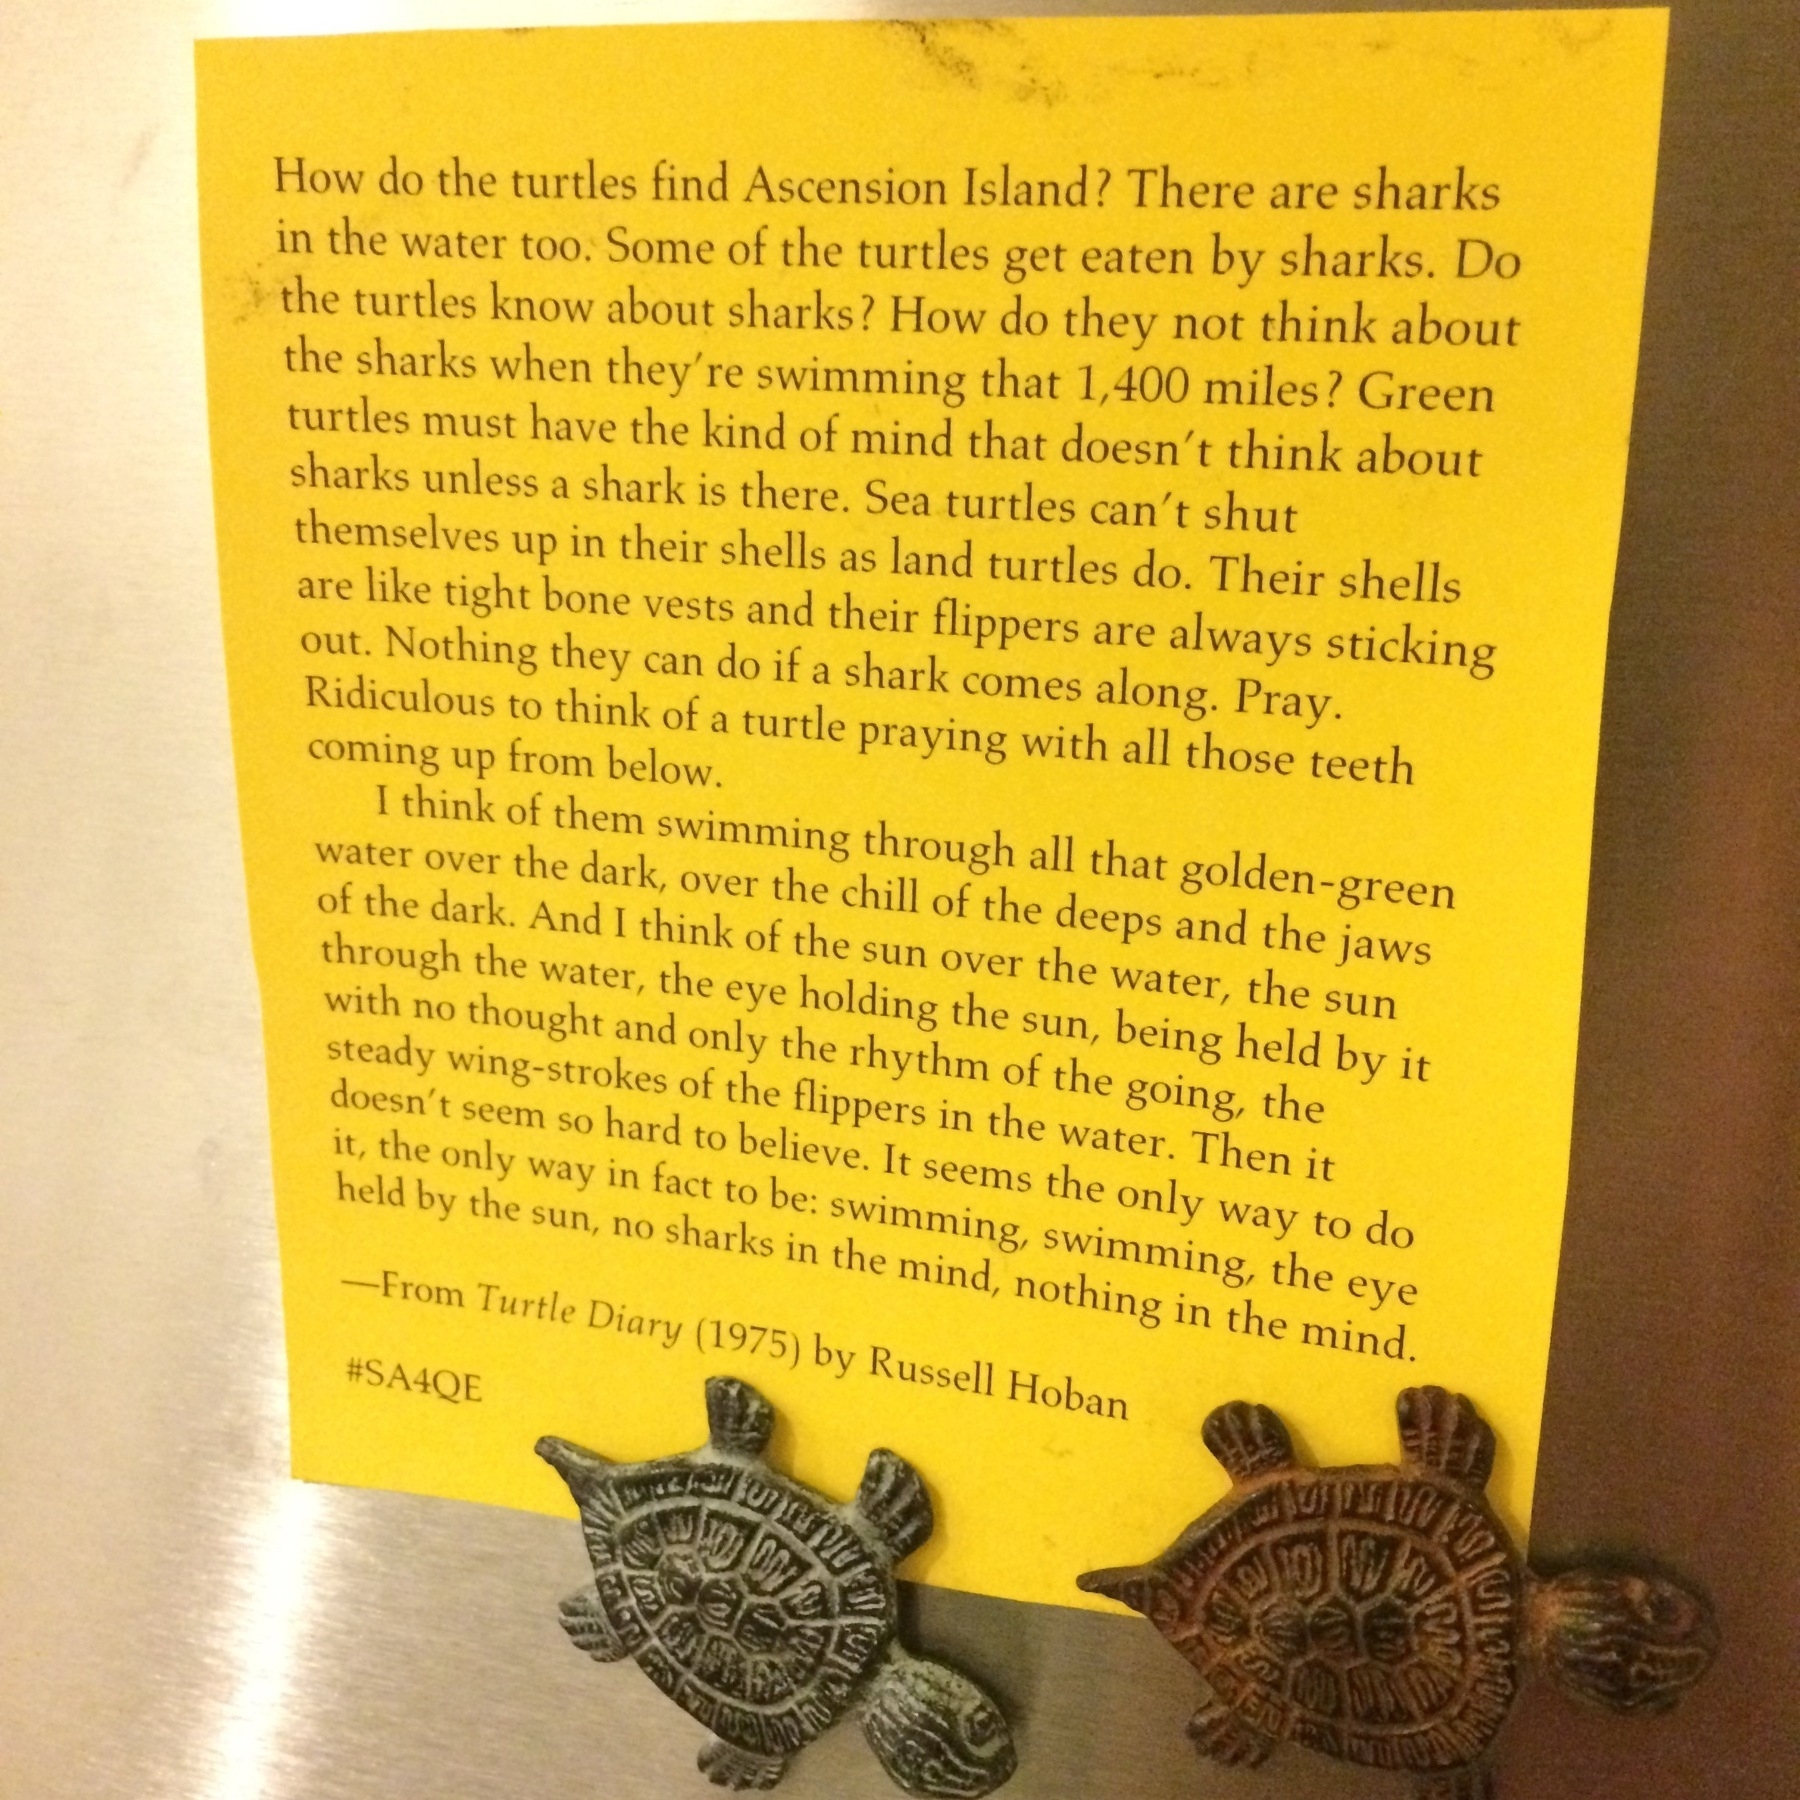 Picture of a passage from Russell Hoban's 1975 novel, Turtle Diary, printed on yellow paper and pinned to a fridge with sea turtle magnets. The quote reads: How do the turtles find Ascension Island? There are sharks in the water too. Some of the turtles get eaten by sharks. Do the turtles know about sharks? How do they not think about the sharks when they're swimming that 1,400 miles? Green turtles must have the kind of mind that doesn't think about sharks unless a shark is there. Sea turtles can't shut themselves up in their shells as land turtles do. Their shells are like tight bone vests and their flippers are always sticking out. Nothing they can do if a shark comes along. Pray. Ridiculous to think of a turtle praying with all those teeth coming up from below. ¶ I think of them swimming through all that golden-green water over the dark, over the chill of the deeps and the jaws of the dark. And I think of the sun over the water, the sun through the water, the eye holding the sun, being held by it with no thought and only the rhythm of the going, the steady wing-strokes of the flippers in the water. Then it doesn't seem so hard to believe. It seems the only way to do it, the only way in fact to be: swimming, swimming, the eye held by the sun, no sharks in the mind, nothing in the mind.